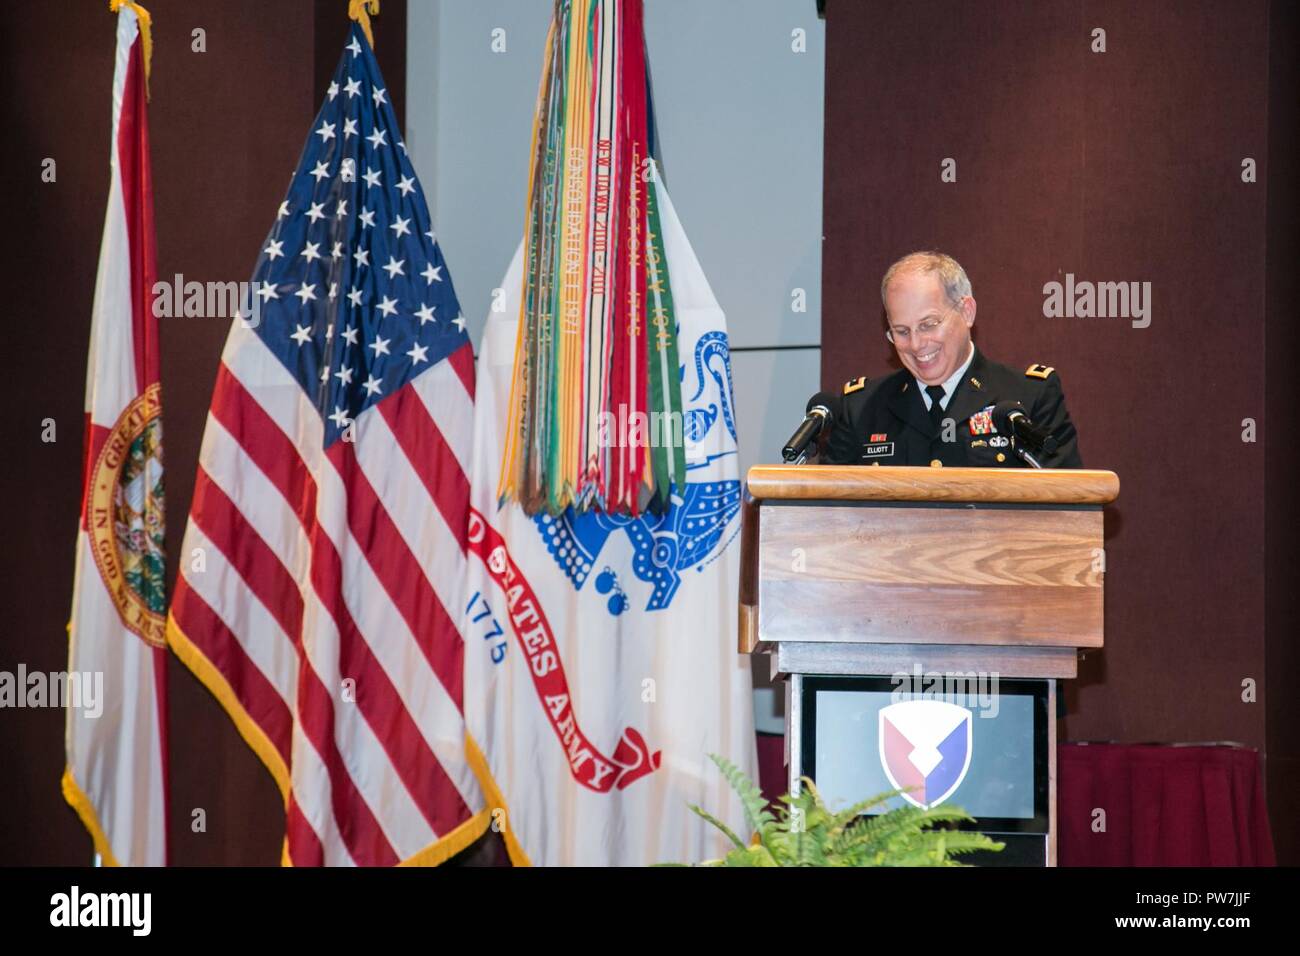 U.S. Army Maj. Gen. Allan Elliott, Chief of Staff for Army Materiel Command, introduces the keynote speaker Mrs. Christine Chavez, during the Hispanic-American Heritage Month Observance Sept. 25, 2017 at Redstone Arsenal, Alabama.  Chavez is the granddaughter of labor leader and civil rights activist Cesar Chavez. Stock Photo